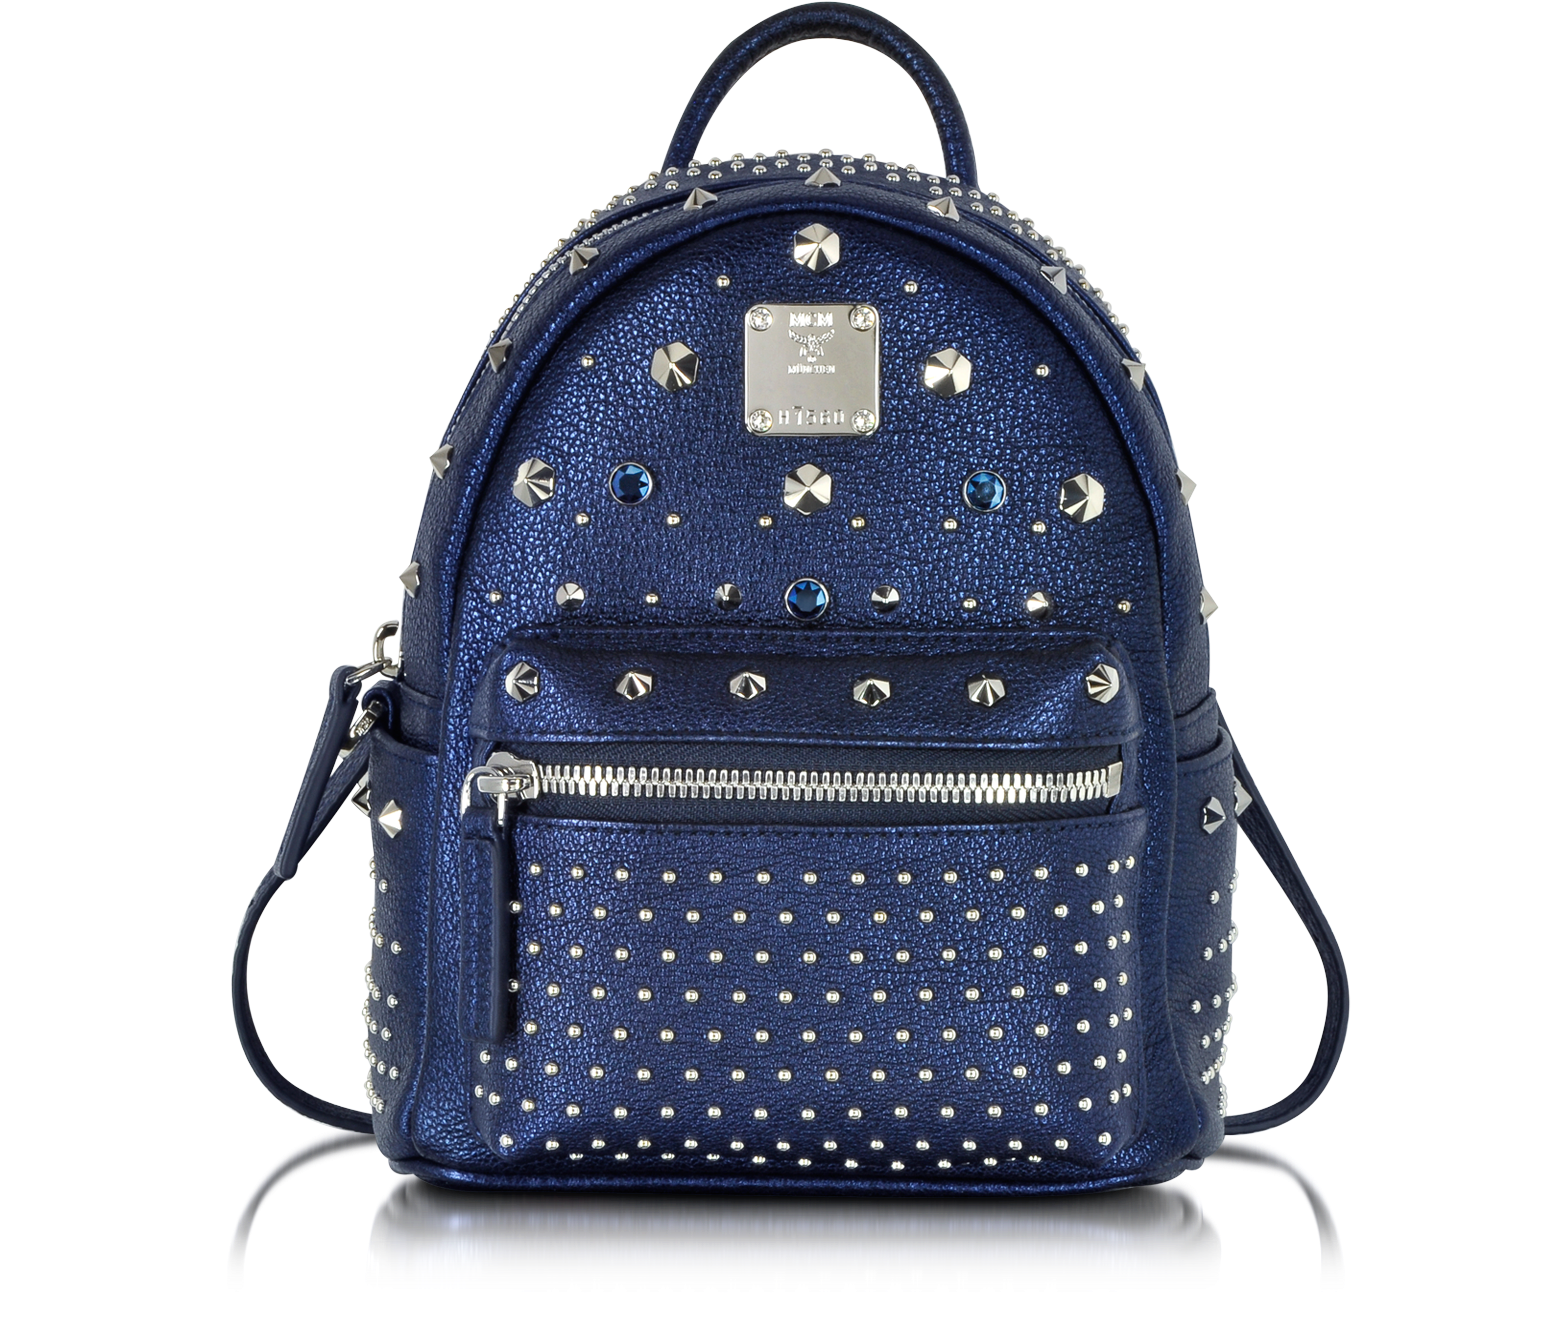 MCM Stark Special Metallic Navy Leather X-Mini Backpack at FORZIERI